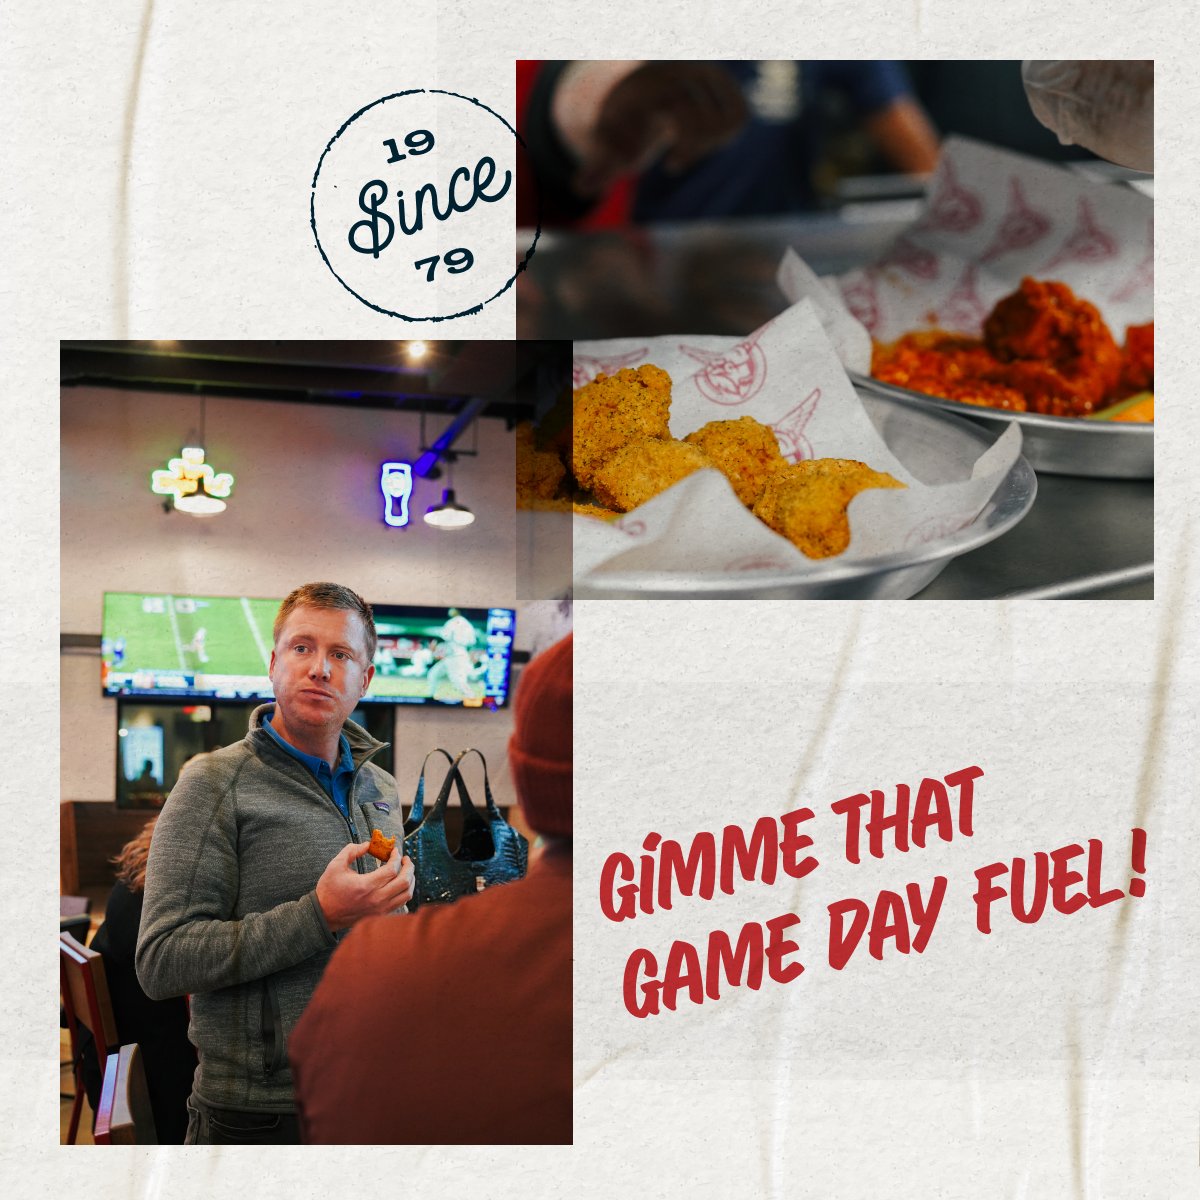 🎉 Score a victory feast at Taco Mac after practice or before a game! 🏆 With our mouthwatering menu and laid-back vibe, we're the ultimate spot to refuel or celebrate those wins. Bring the team together, kick back, and enjoy lunch or dinner at Taco Mac! 🌮🍻